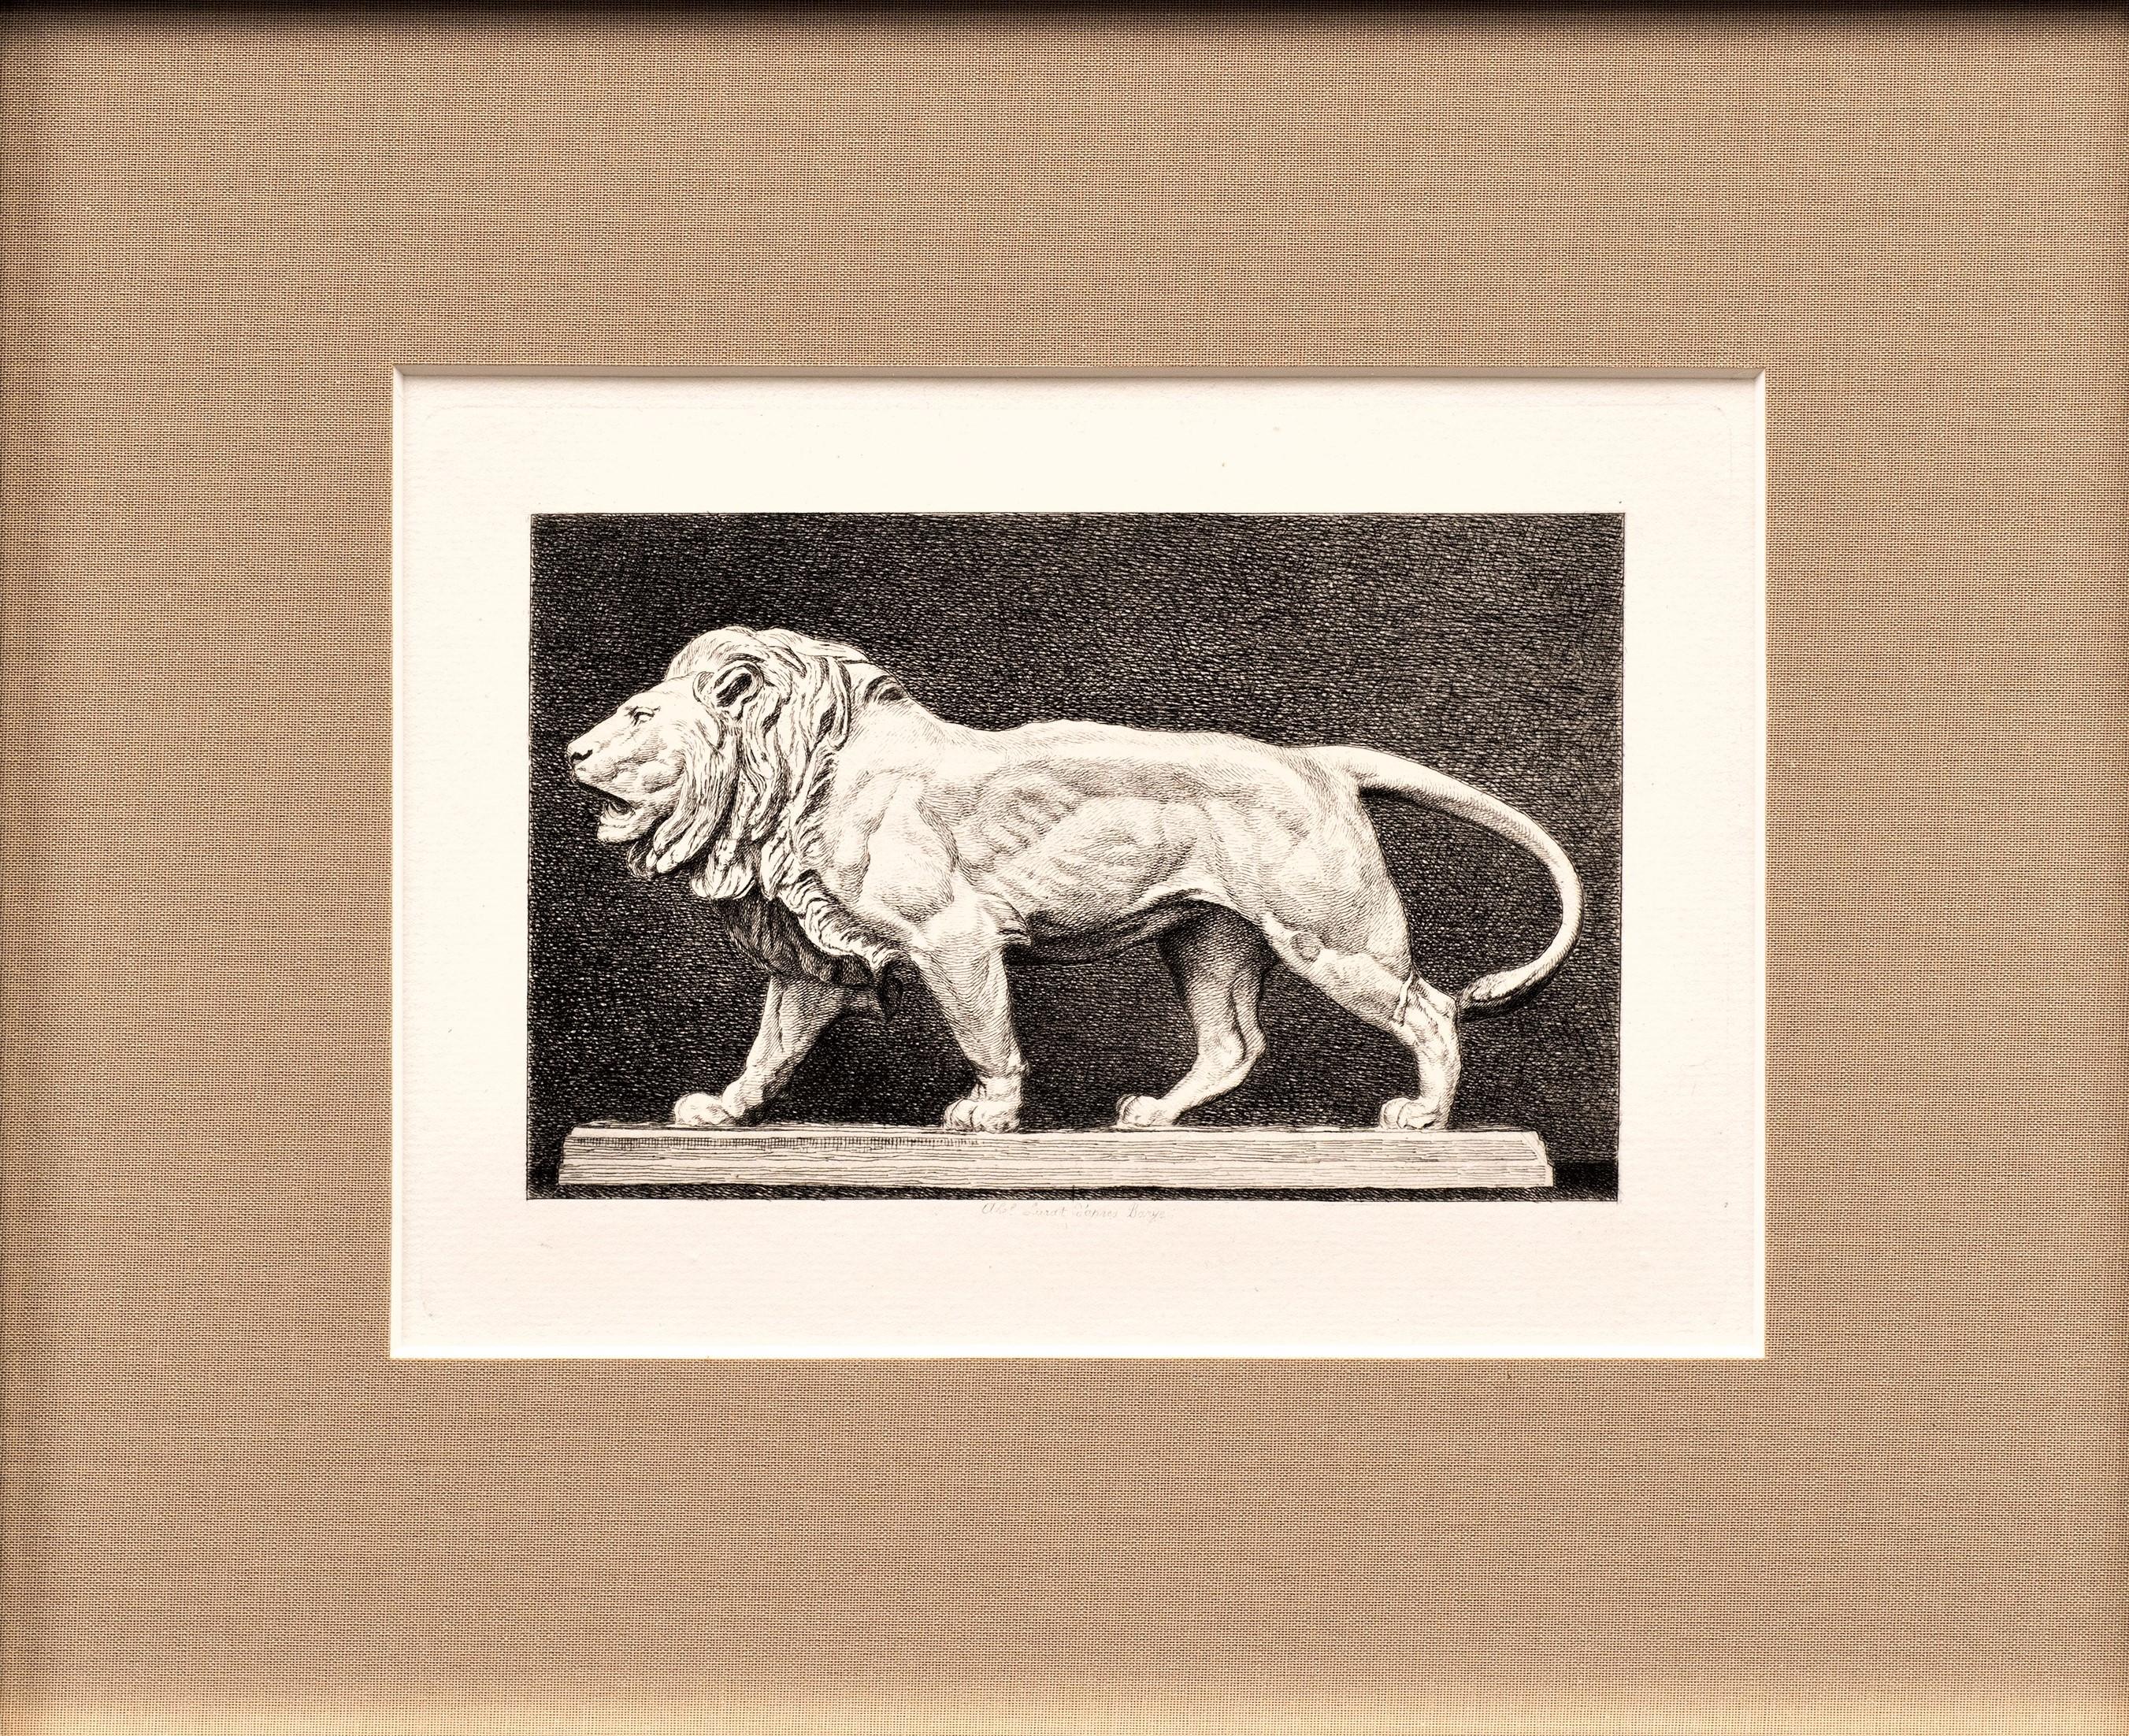 Le Lion Qui Marche
Antoine-Louis Barye (French, 1796-1875) 
Circa 1880  
Etching on laid paper after the original bronze by master etcher Abel Lurat (French, 1829-1890).   
Signed in the plate lower center

Countless awards, medals, commissions;